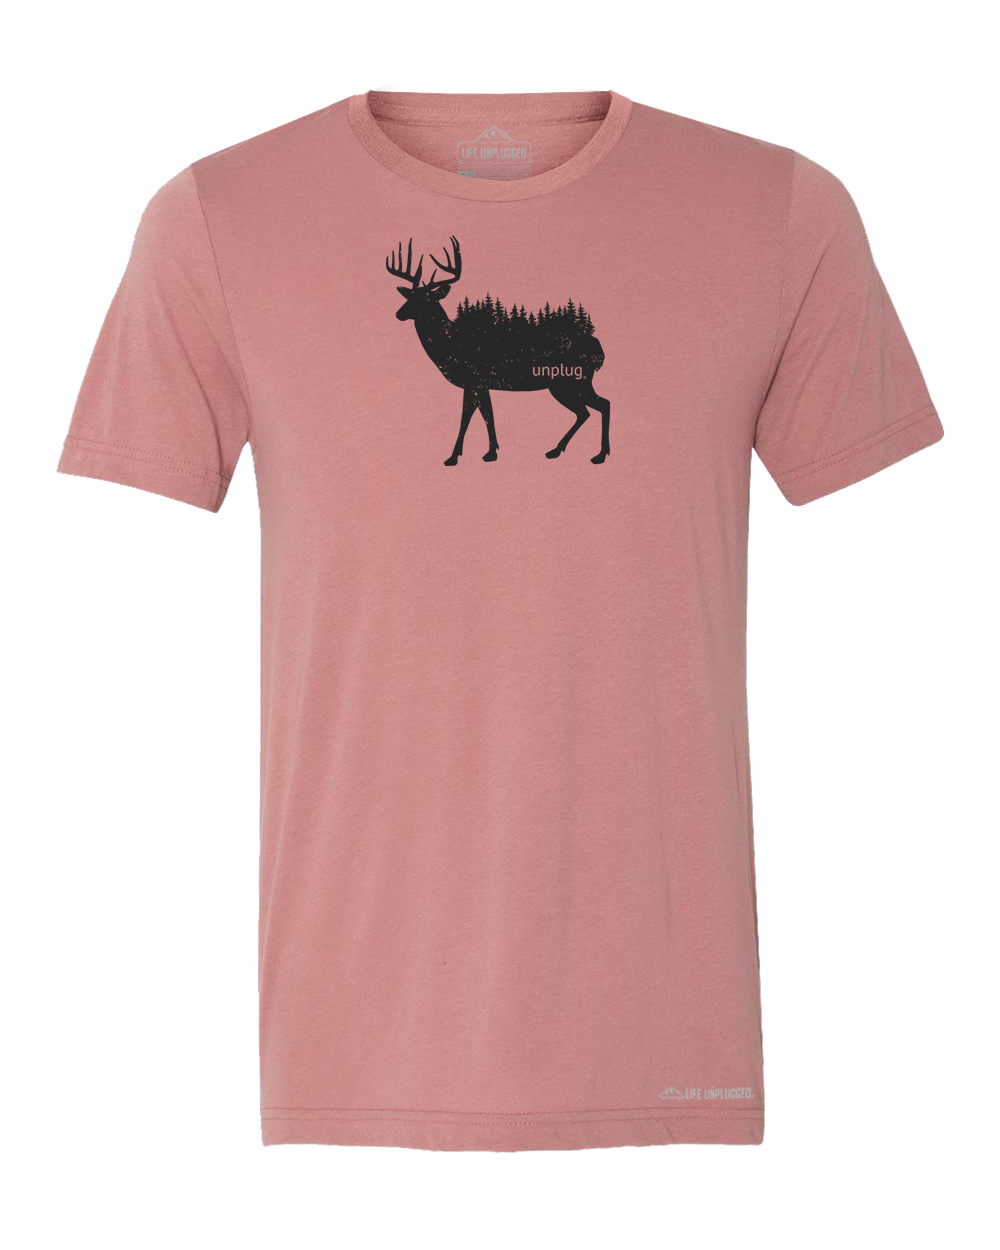 Deer In The Trees Premium Triblend T-Shirt - Life Unplugged